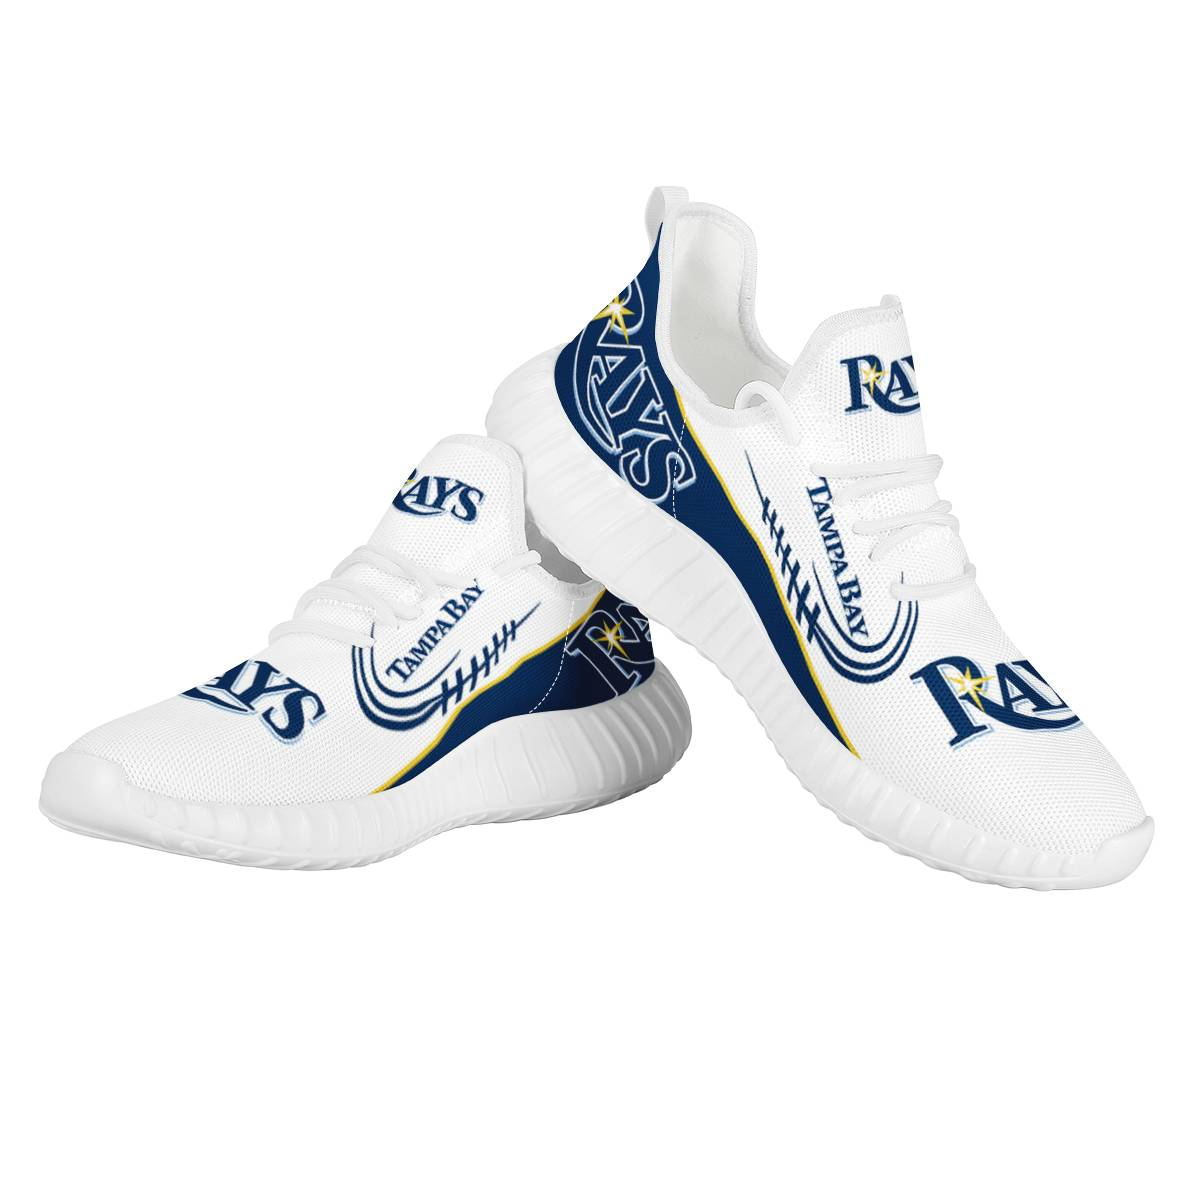 Men's Tampa Bay Rays Mesh Knit Sneakers/Shoes 003